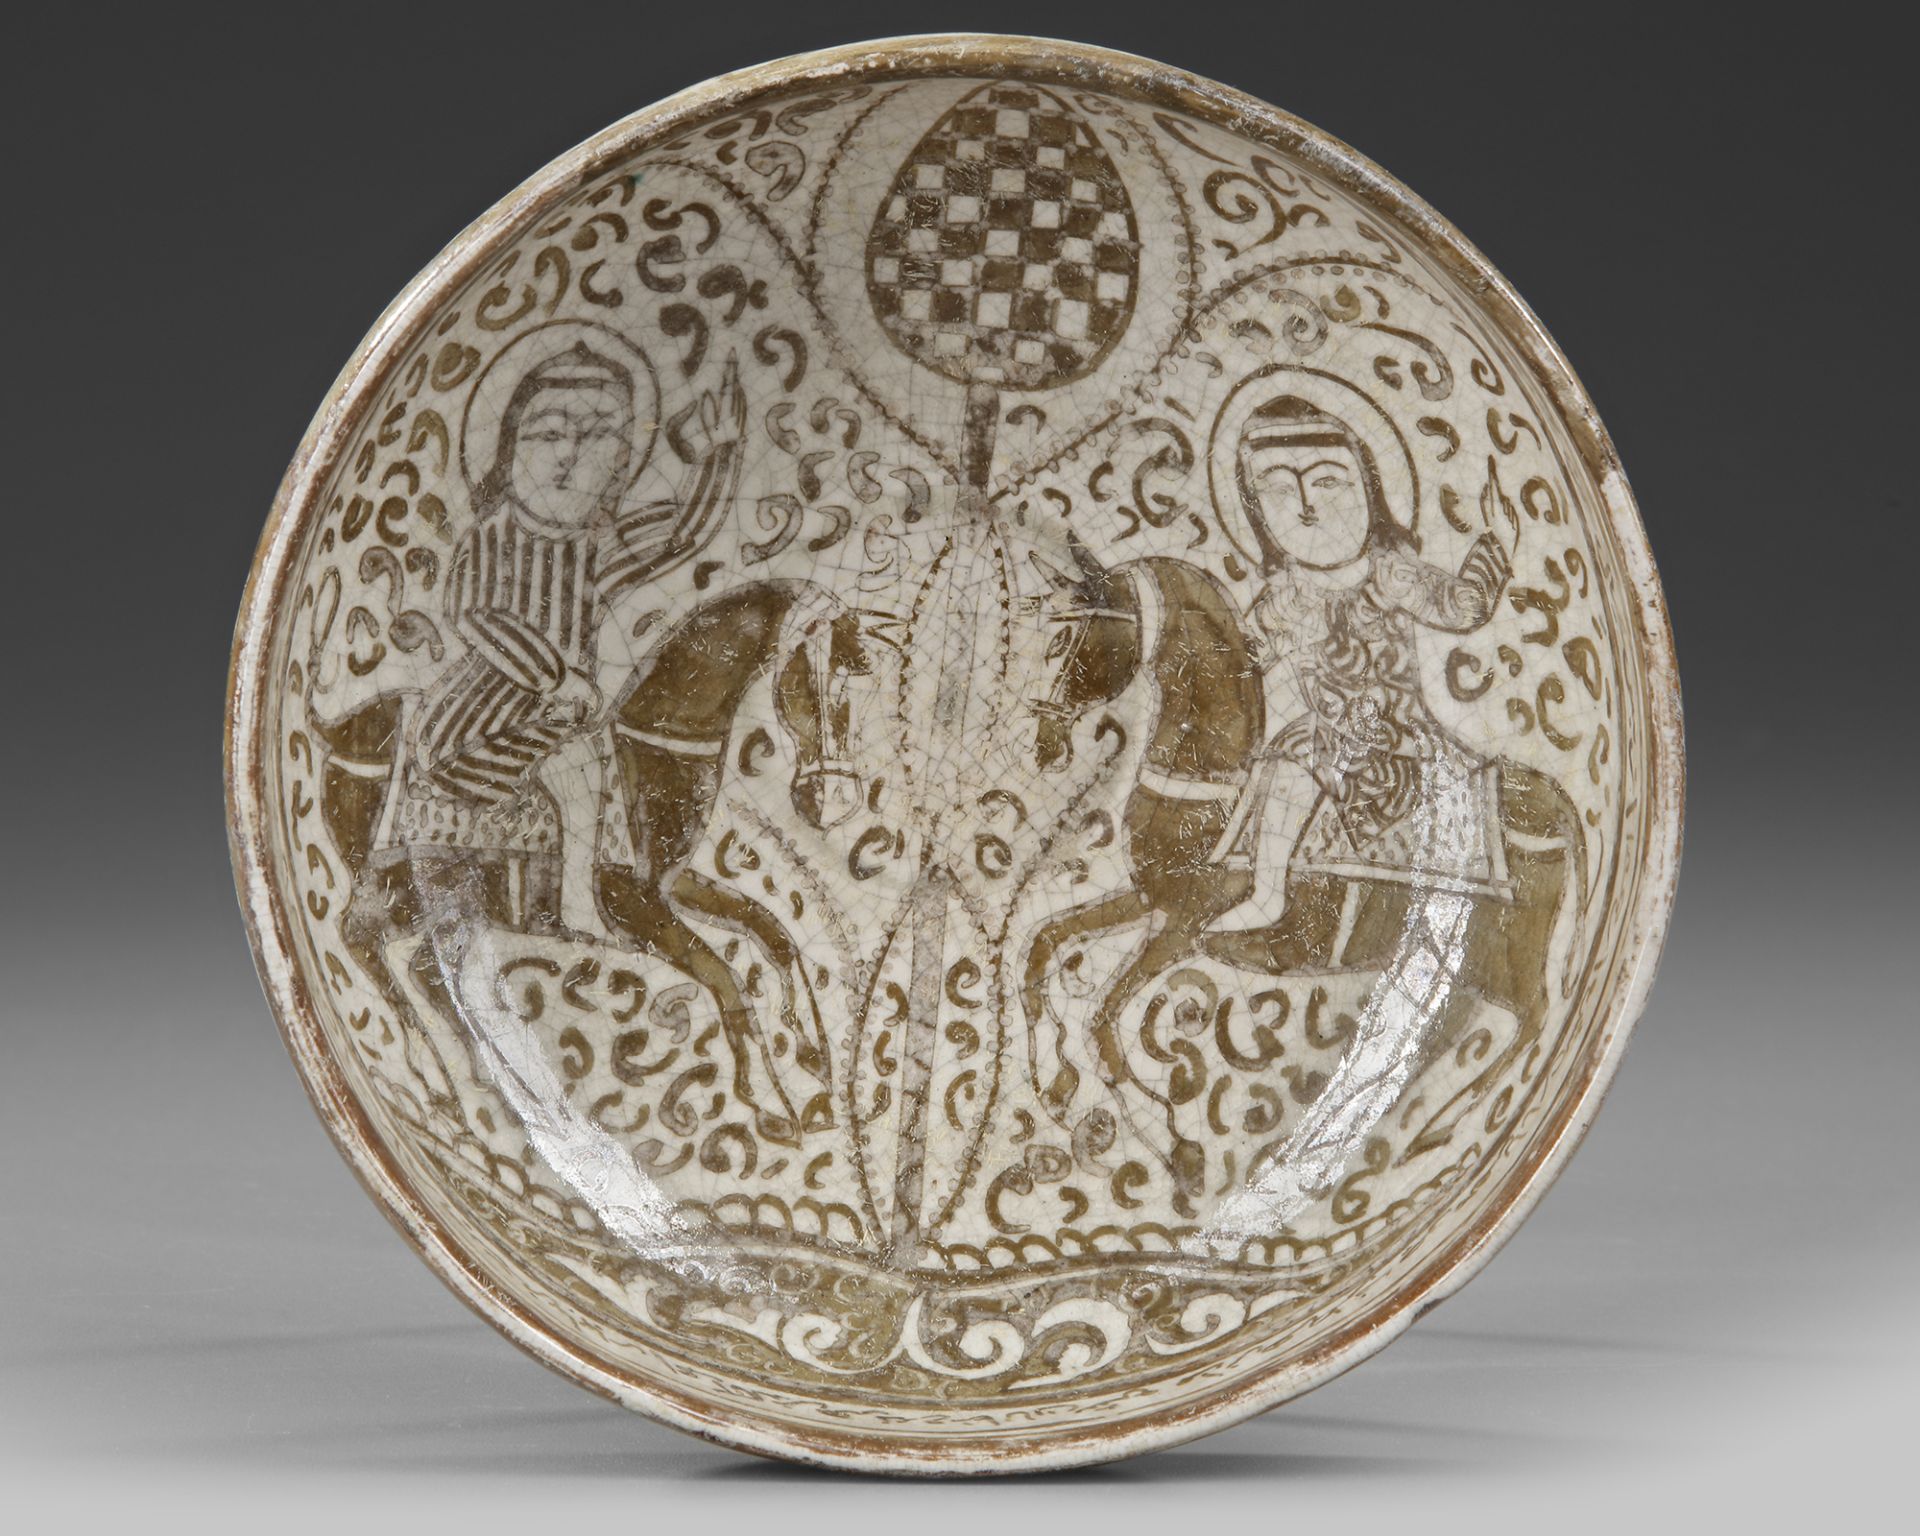 A KASHAN LUSTRE POTTERY BOWL, PERSIA, LATE 12TH - EARLY 13TH CENTURY - Image 2 of 8